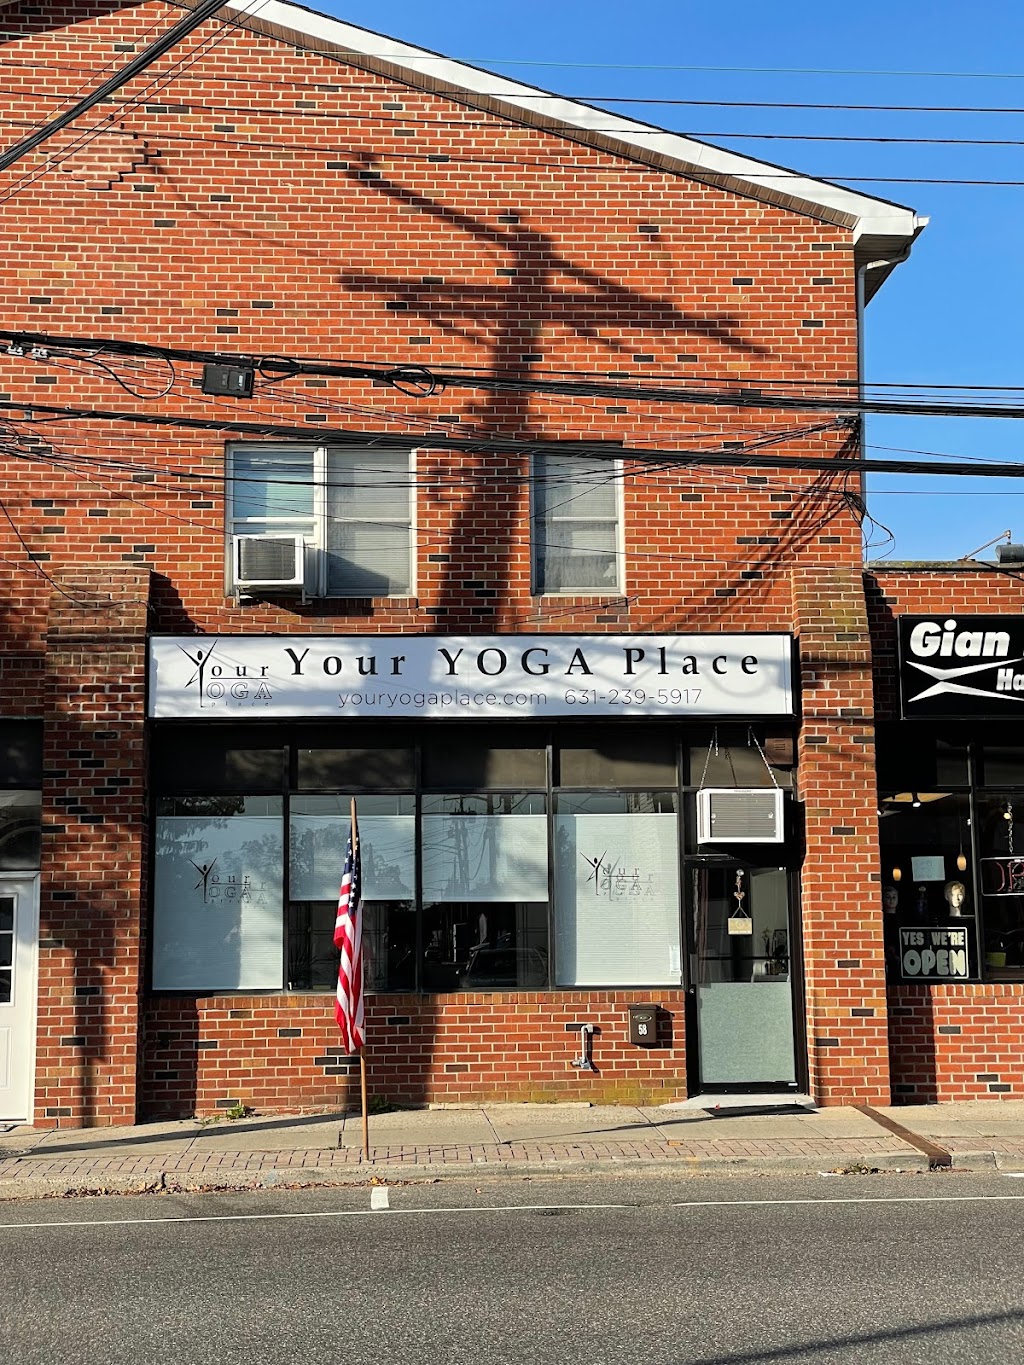 Your Yoga Place | 58 Larkfield Rd, East Northport, NY 11731 | Phone: (631) 239-5917